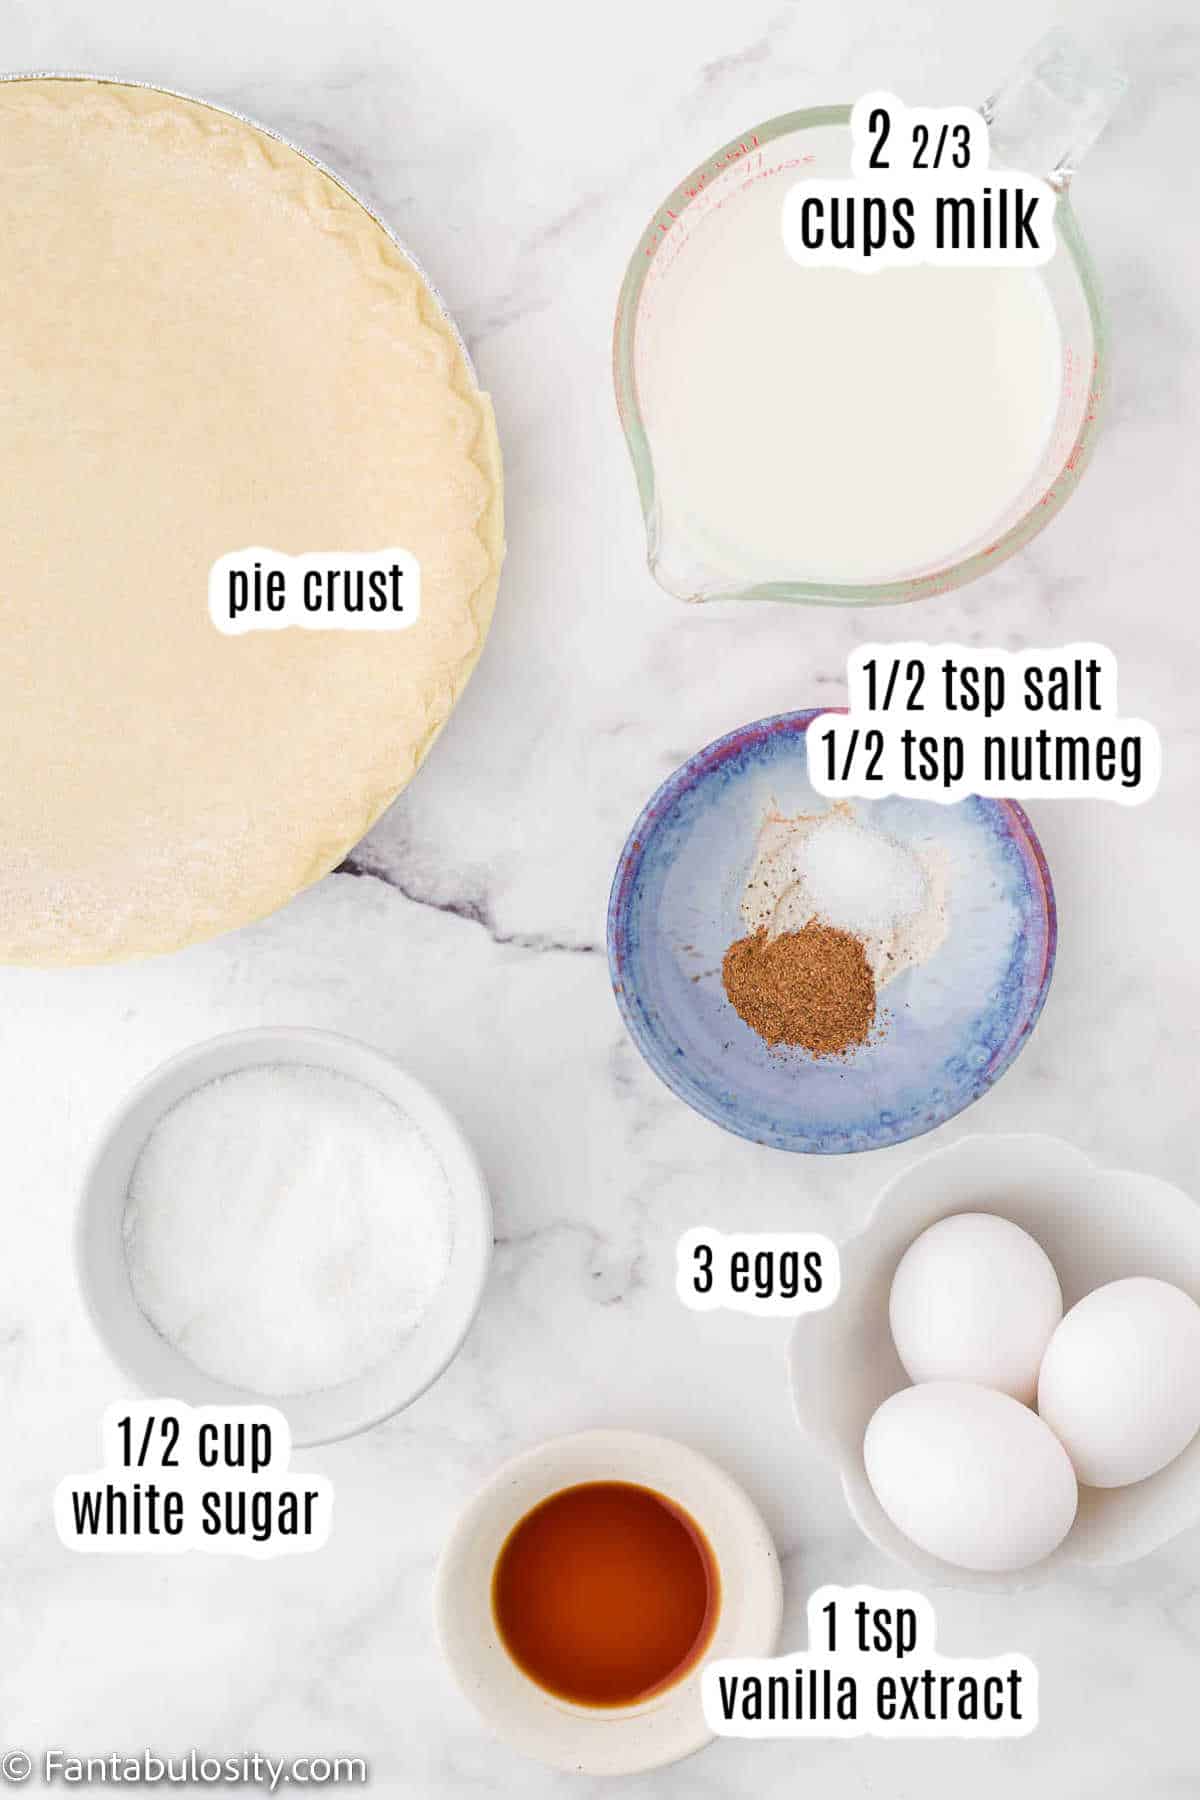 Labeled ingredients for egg custard.